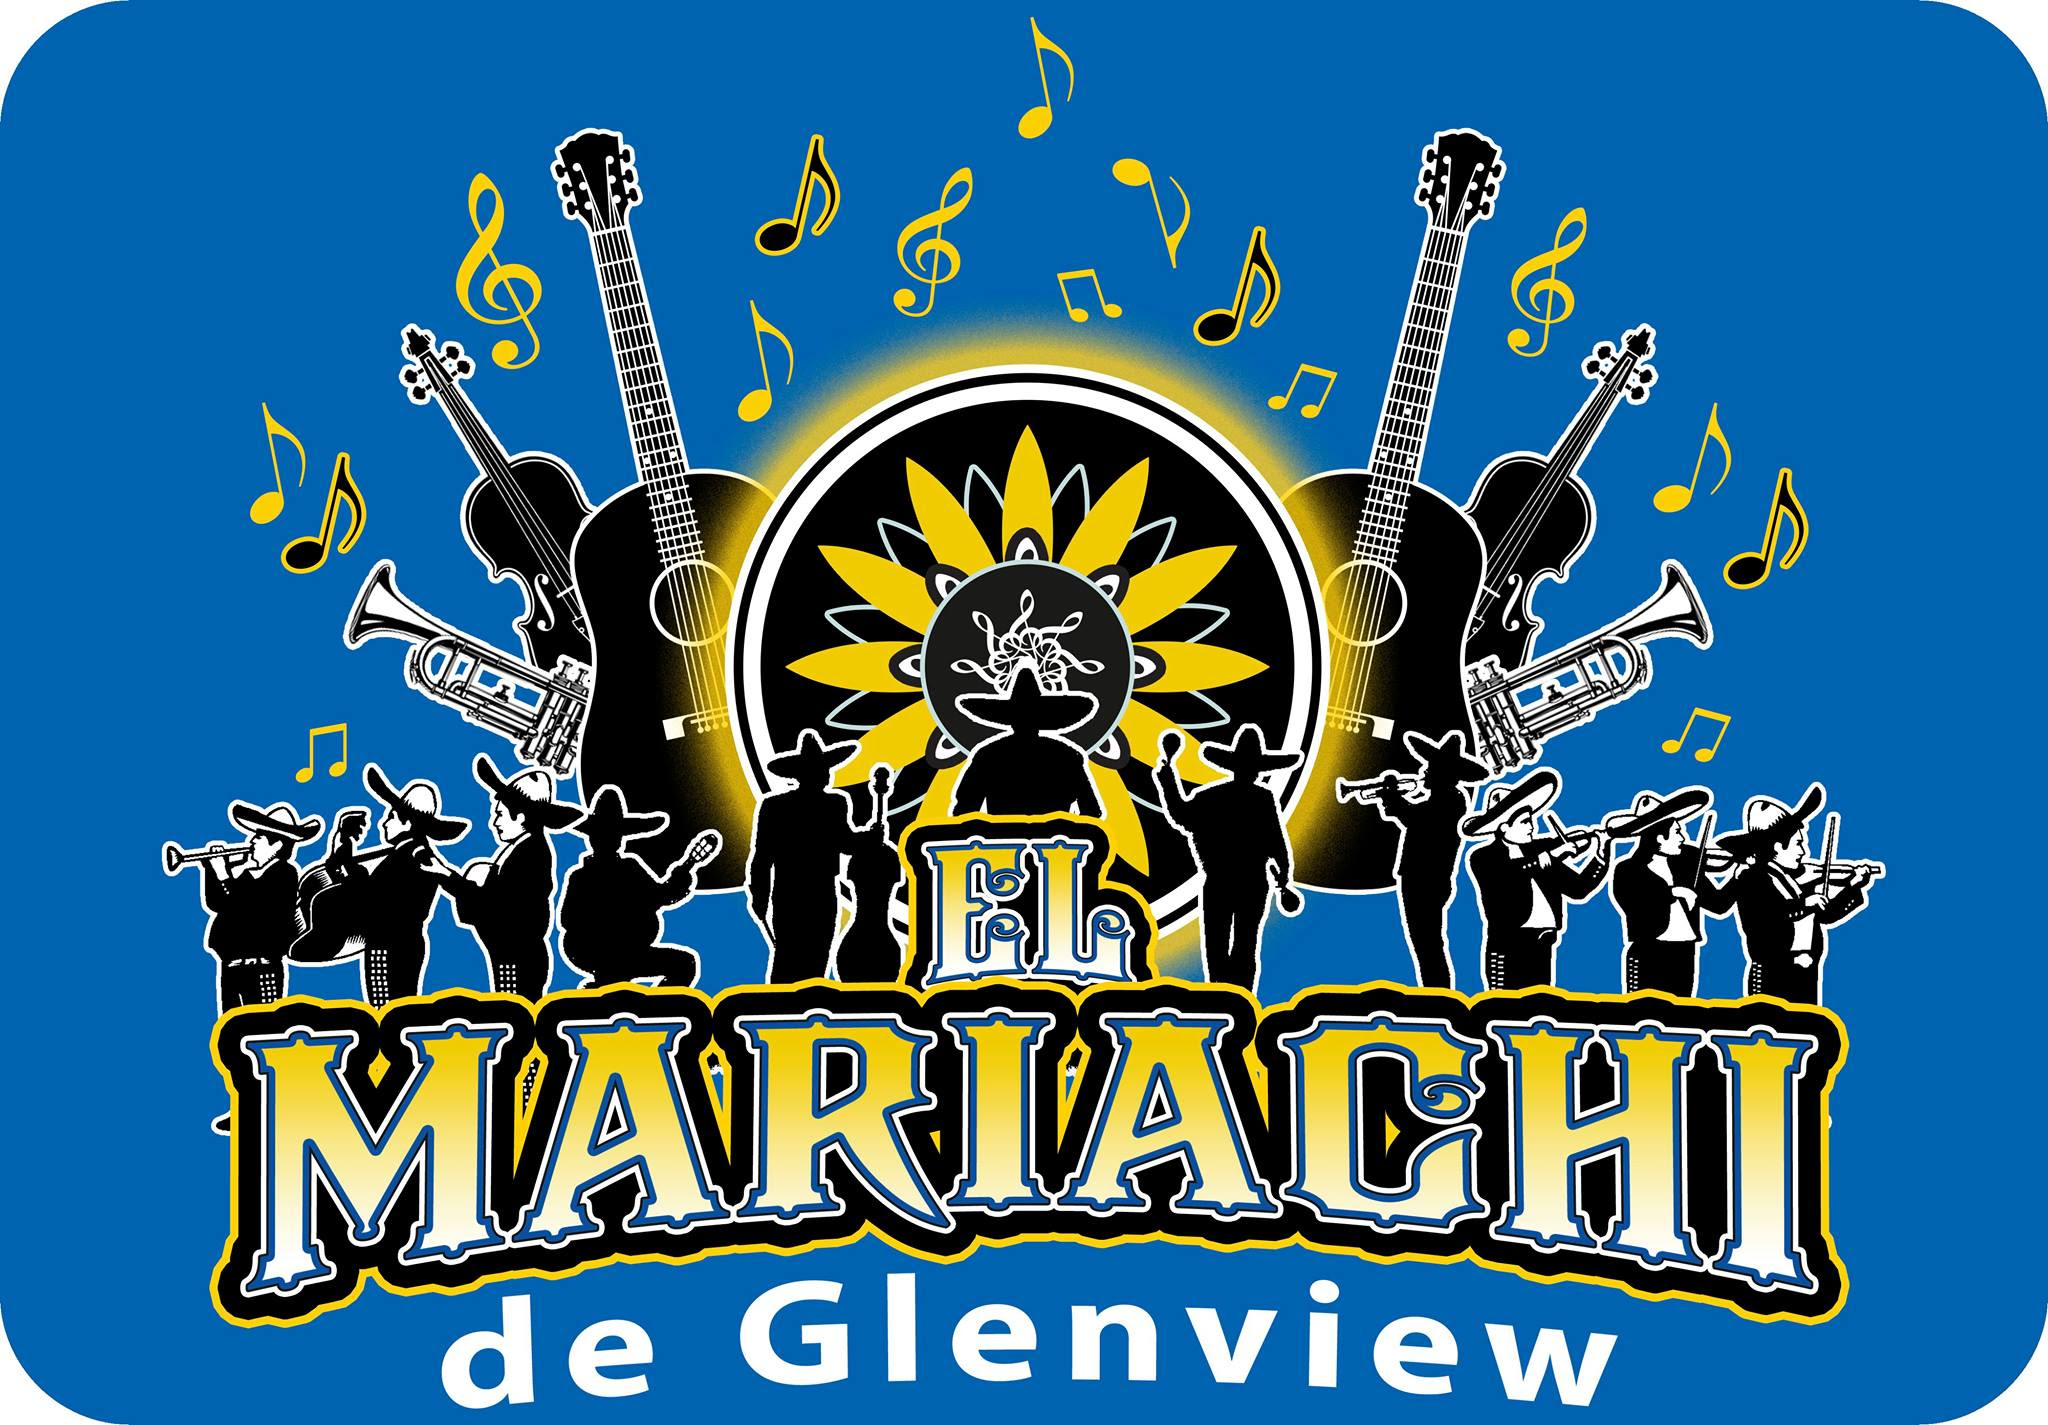 The Glenview Mariachi Band program began in the 2014-15 school year by Rich Clark.